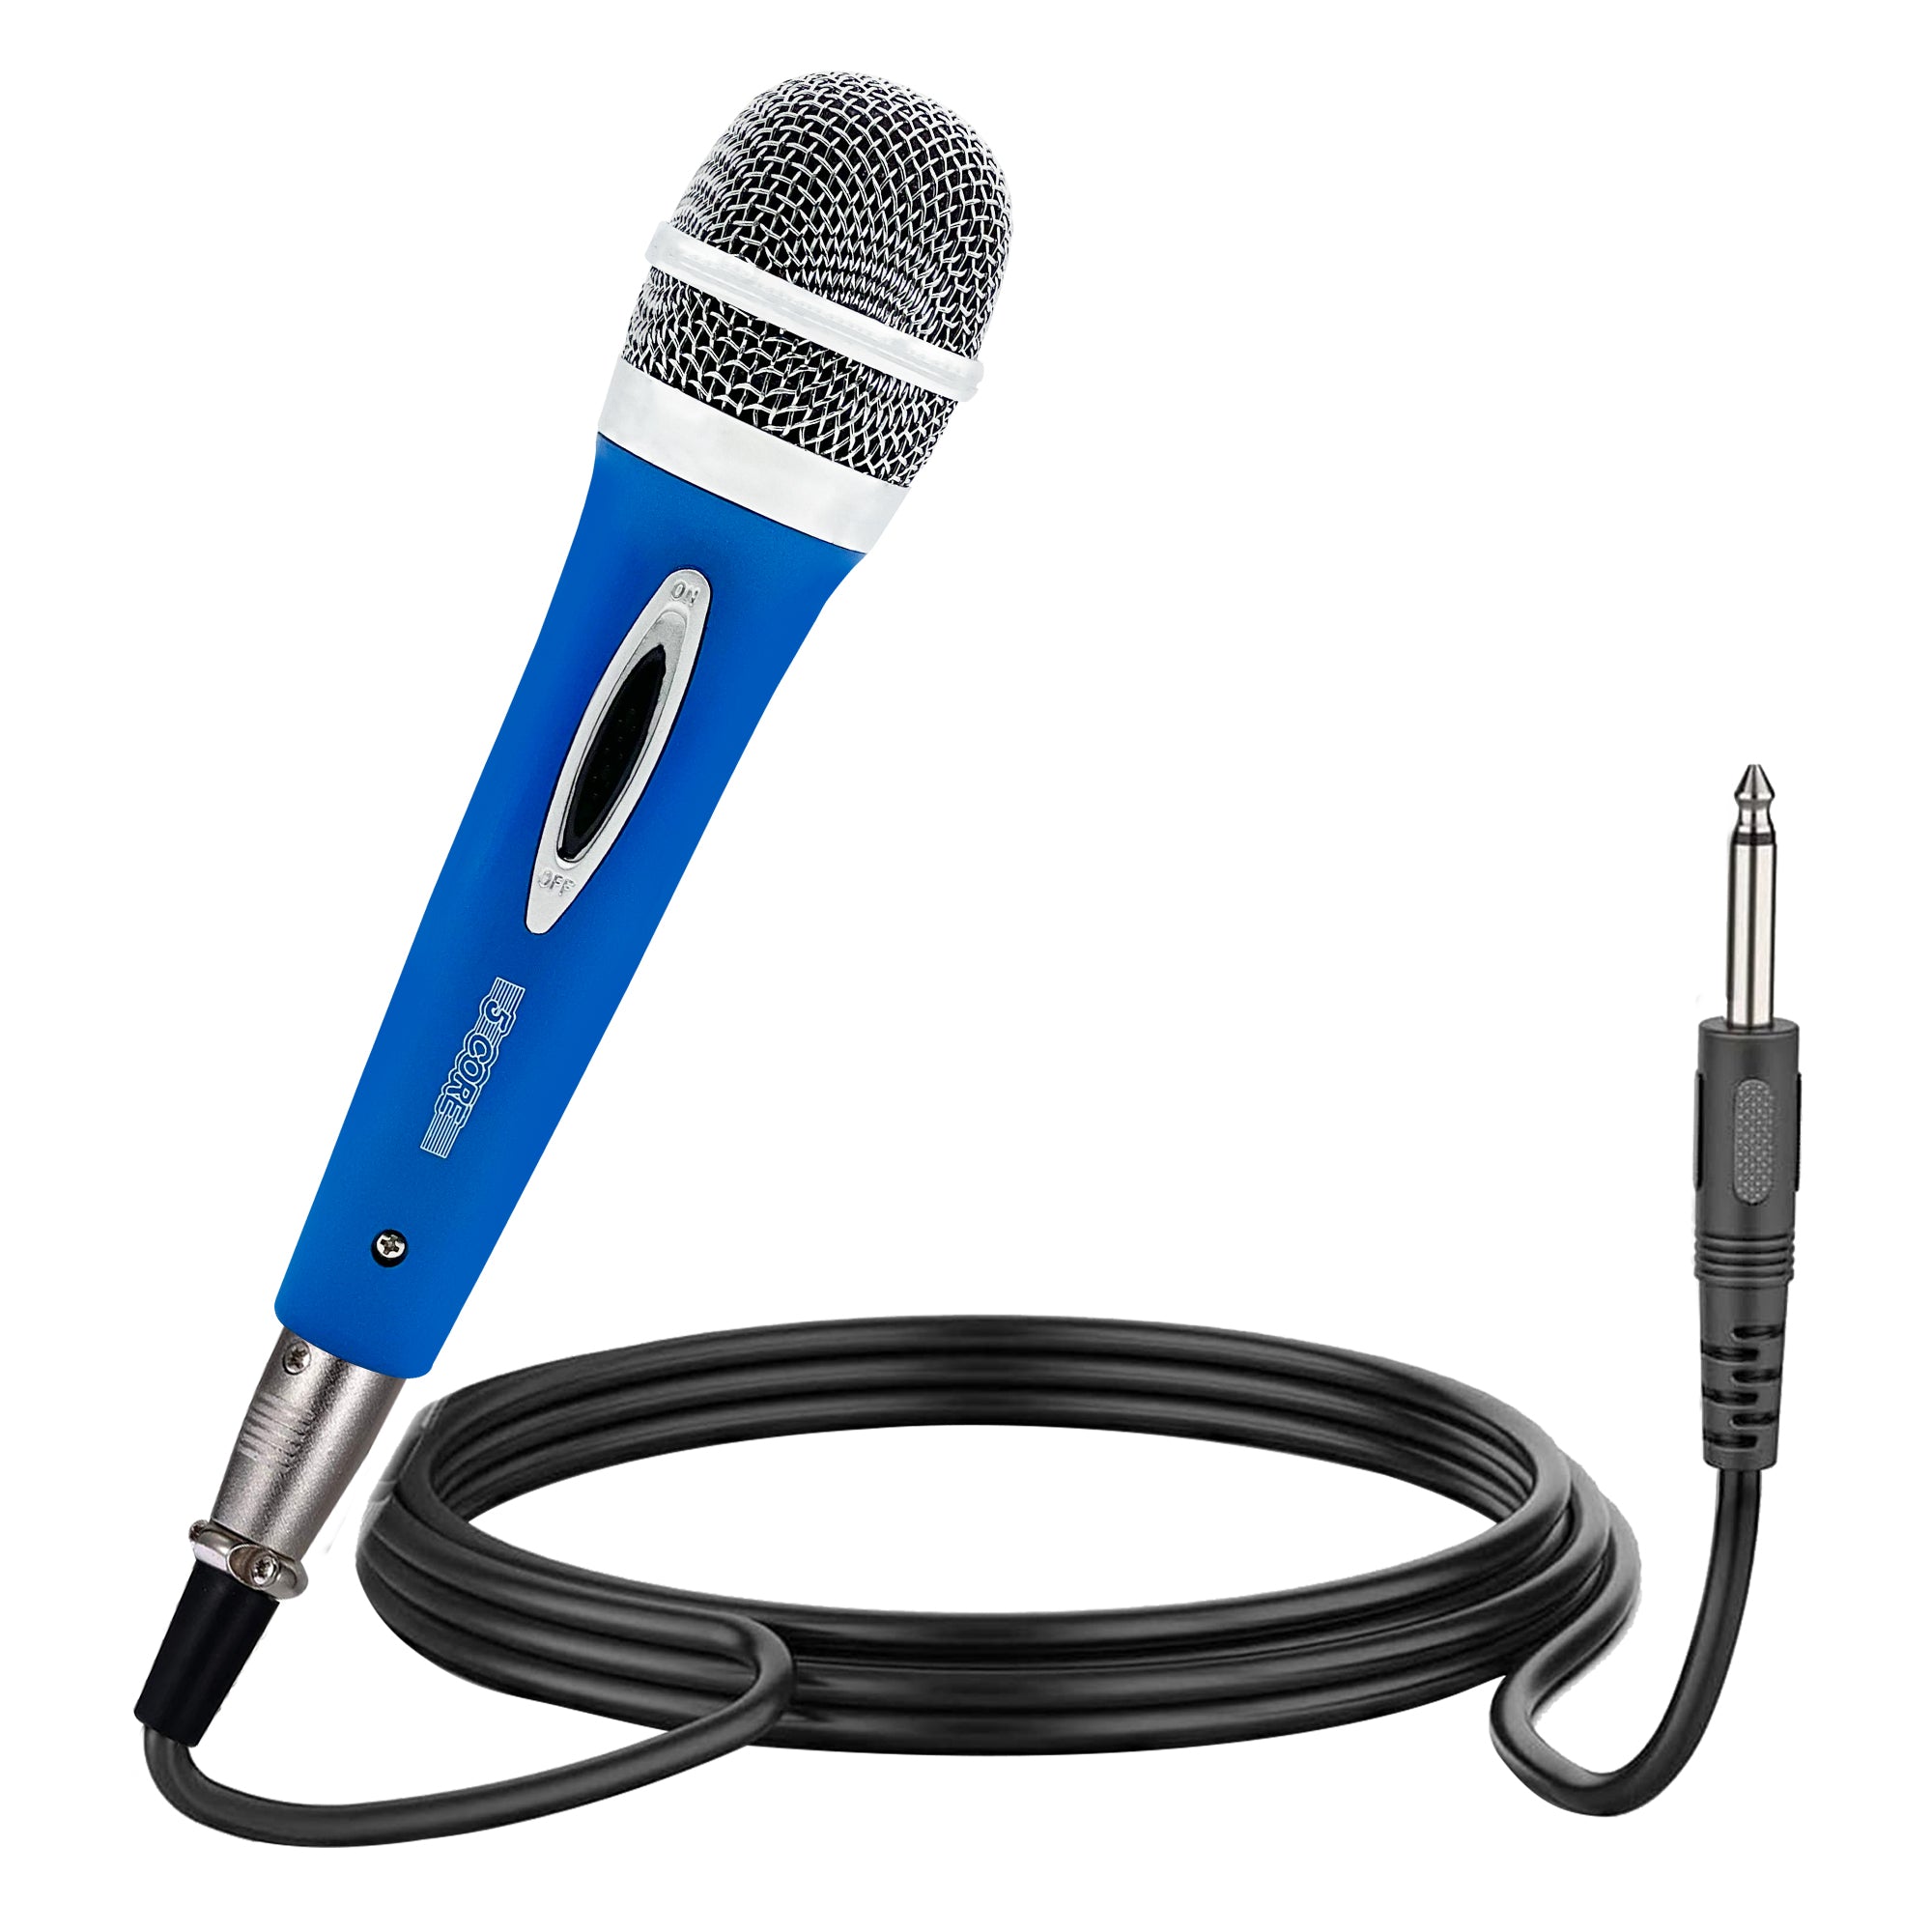 5 Core Microphone 1 Piece Blue Karaoke XLR Wired Mic Professional Studio Microfonos w ON/OFF Switch Integrated Pop Filter Dynamic Moving Coil Cardioid Unidirectional Pickup Handheld Micrófono for Singing DJ Podcast Speeches Includes Cable - PM 286 BLU